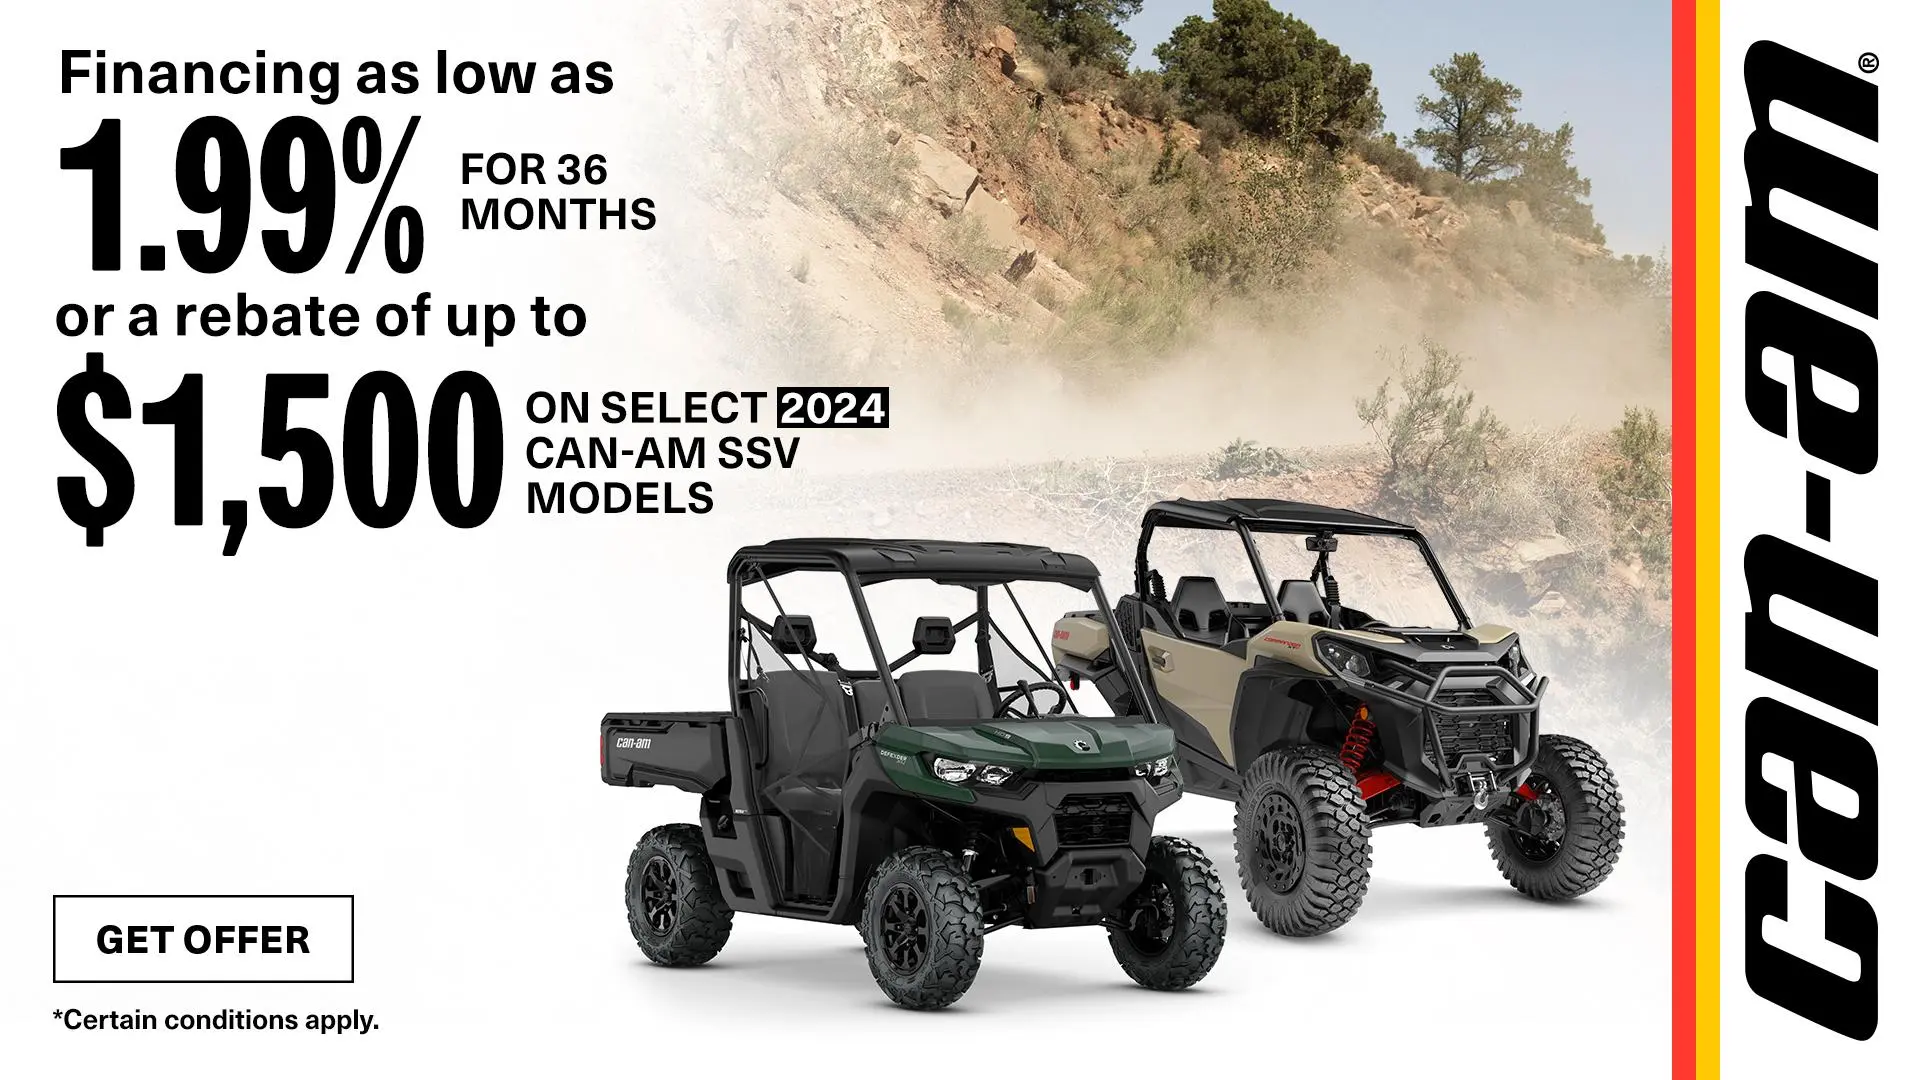 Financing starting at 1.99% for 36 months or up to $1,500 rebate on select 2024 Can-Am SSV models